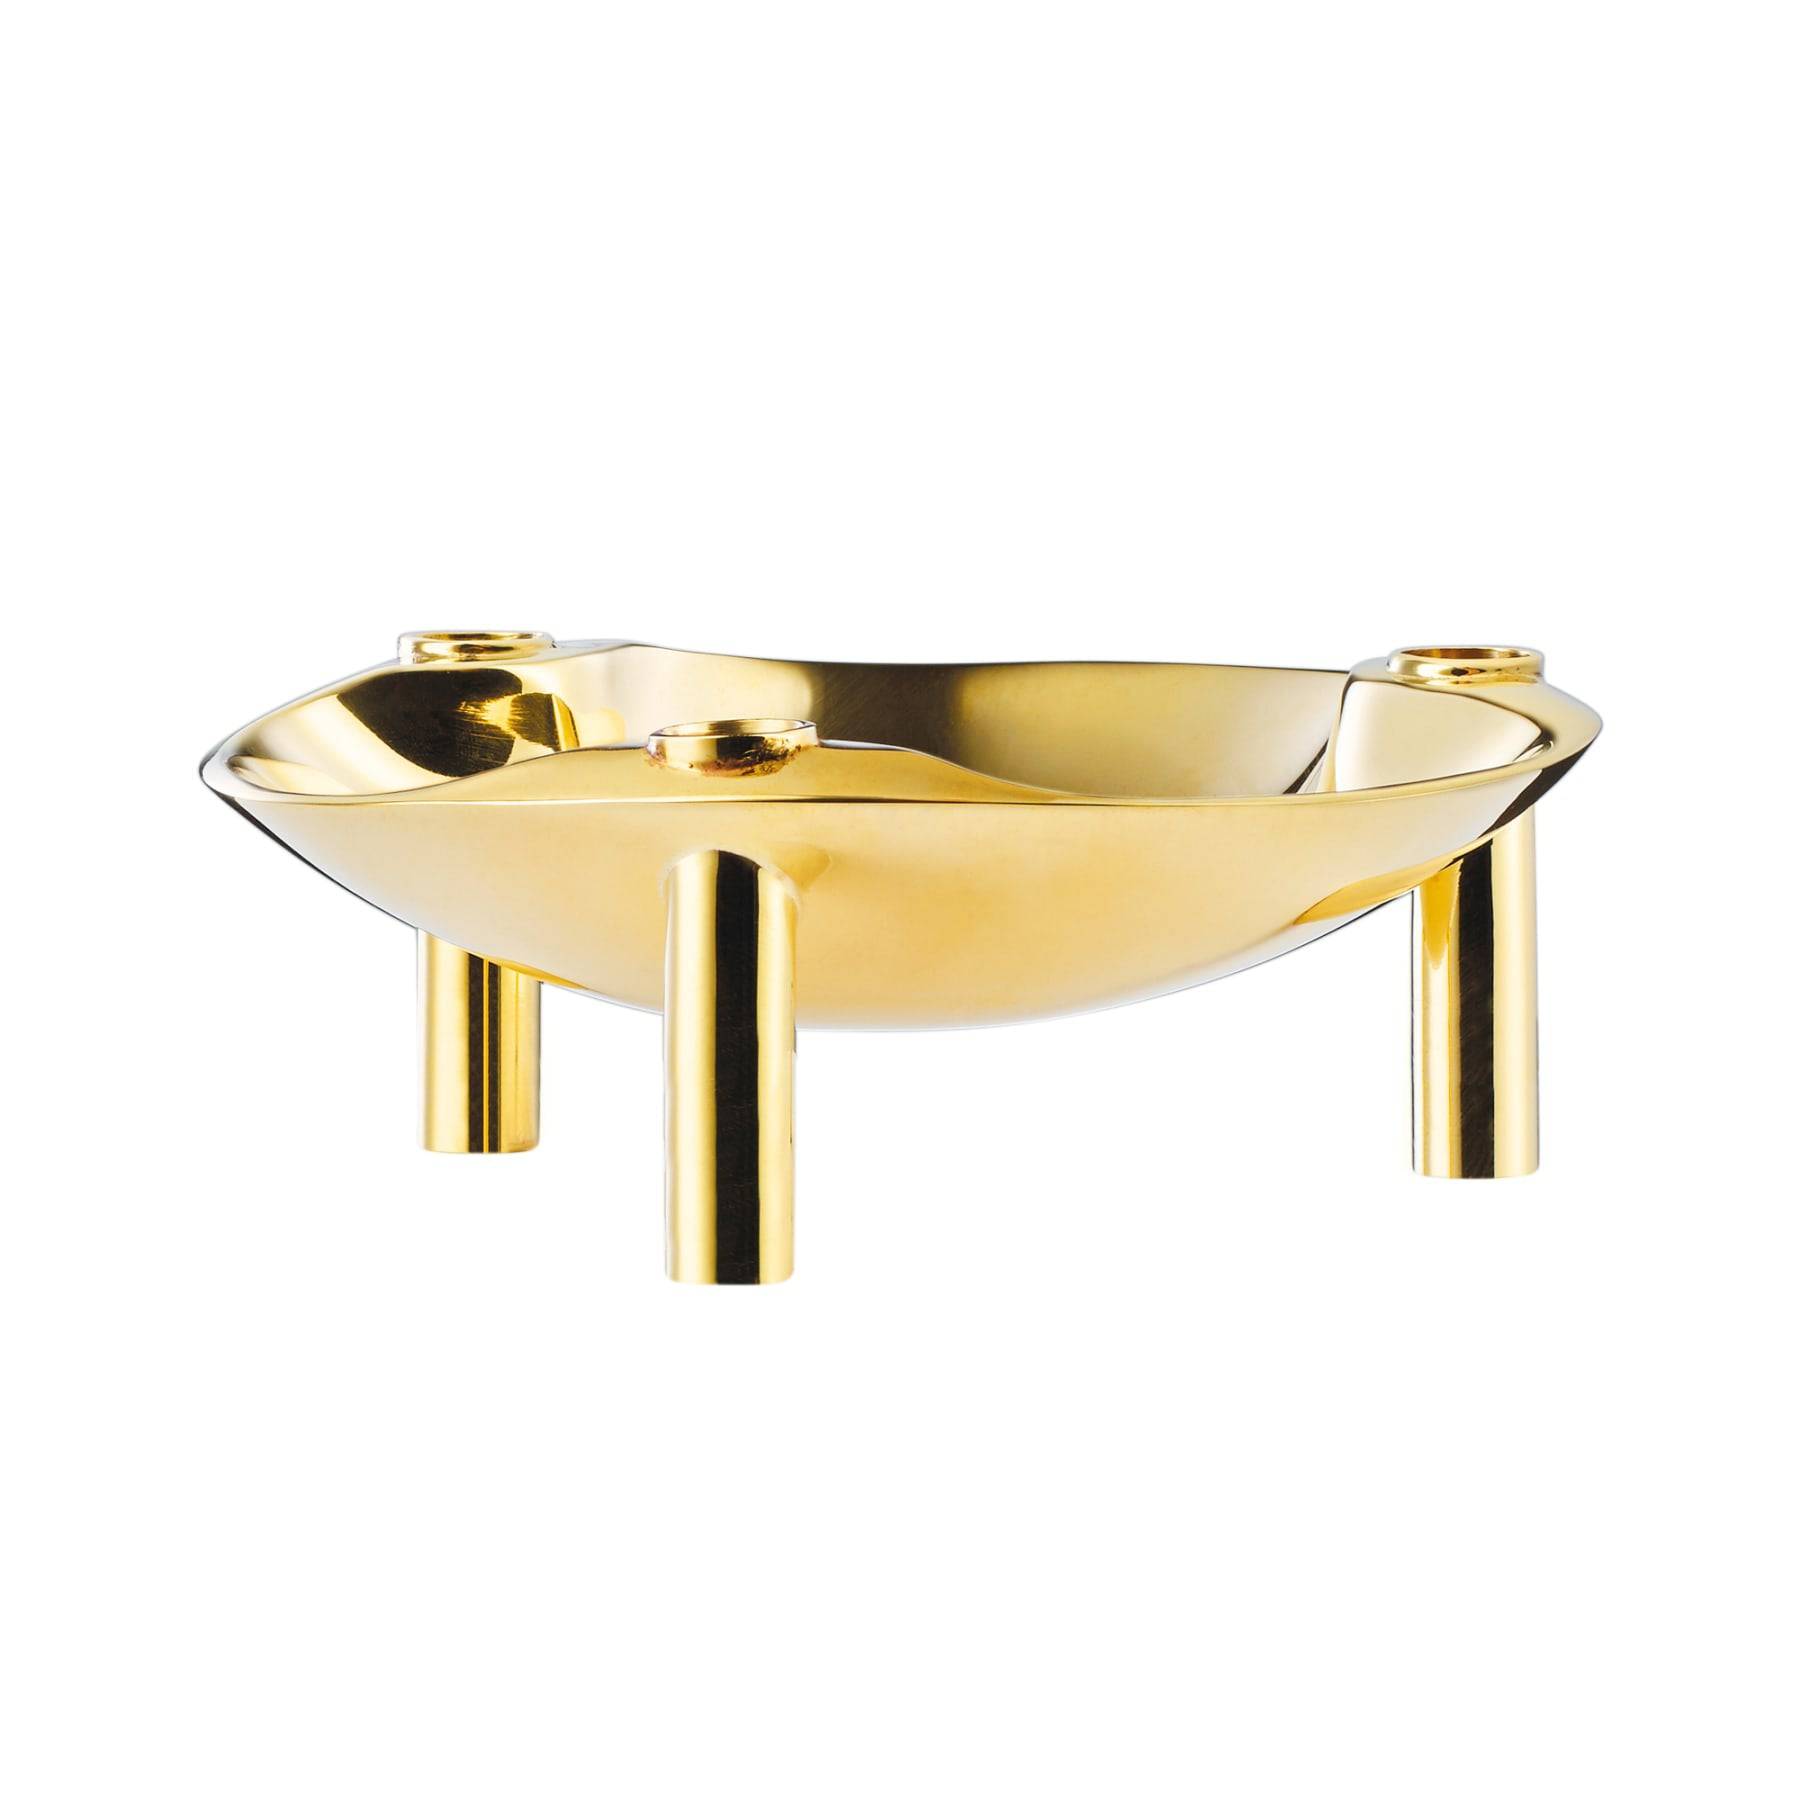 Candle Holder Bowl - Solid Brass